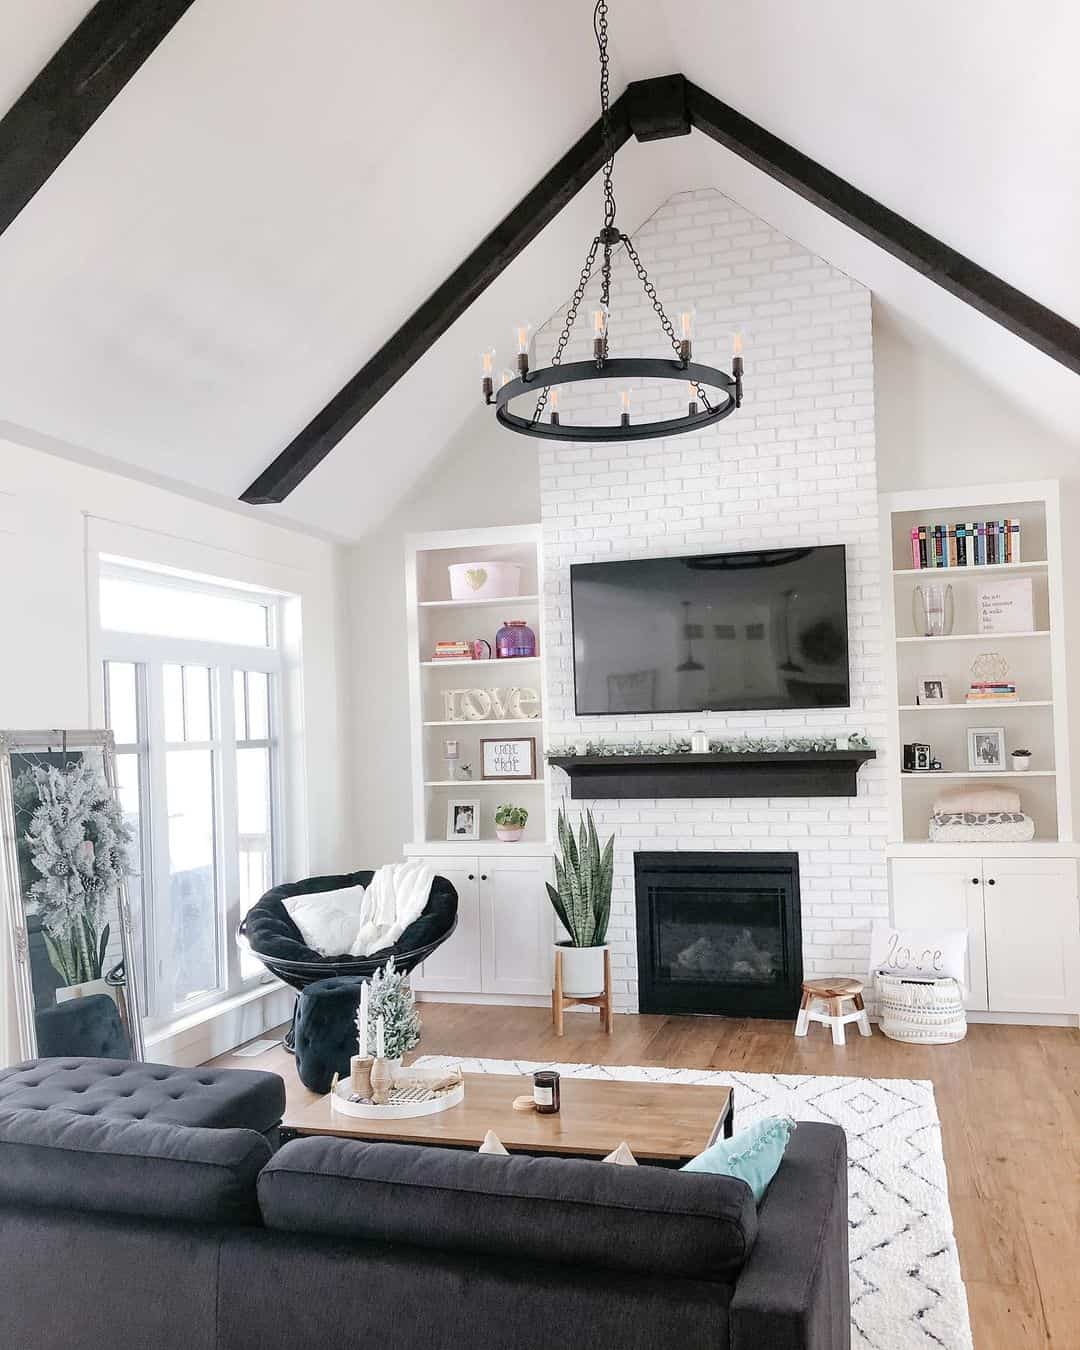 Transforming White Ceilings with Exposed Black Beams